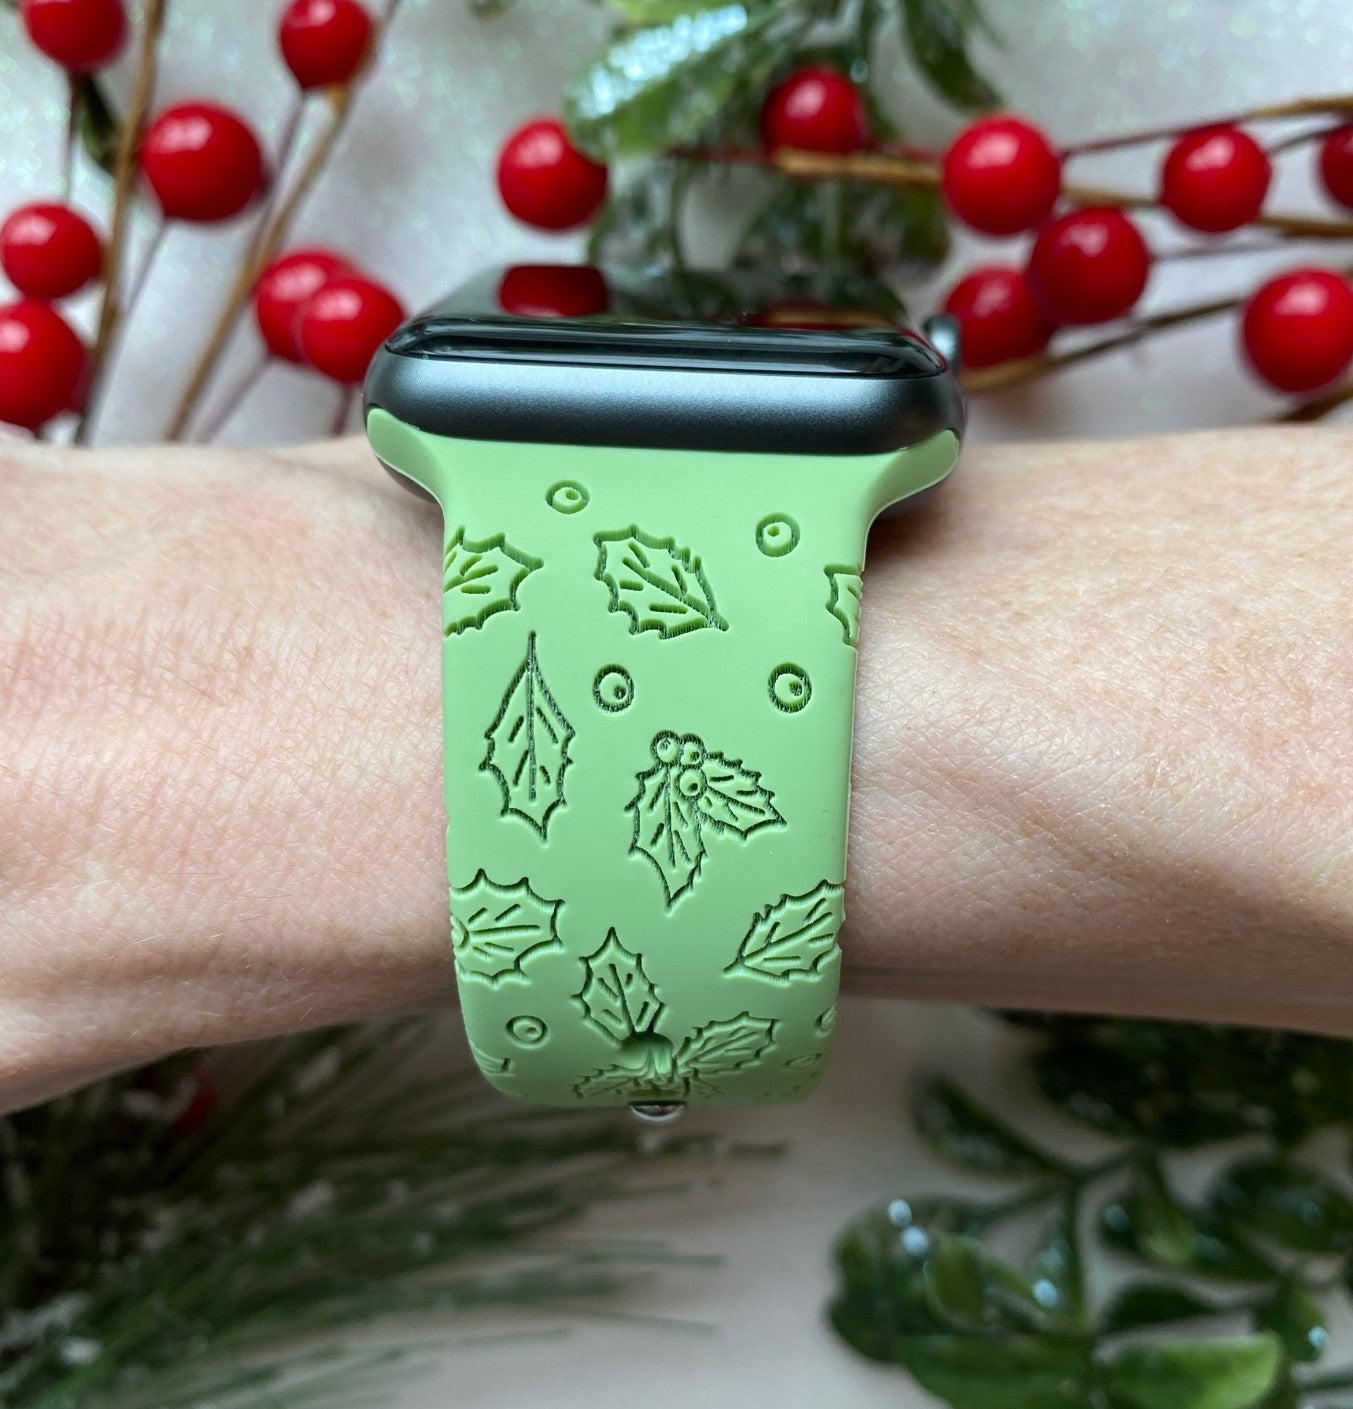 Holly Winter Apple Watch Band